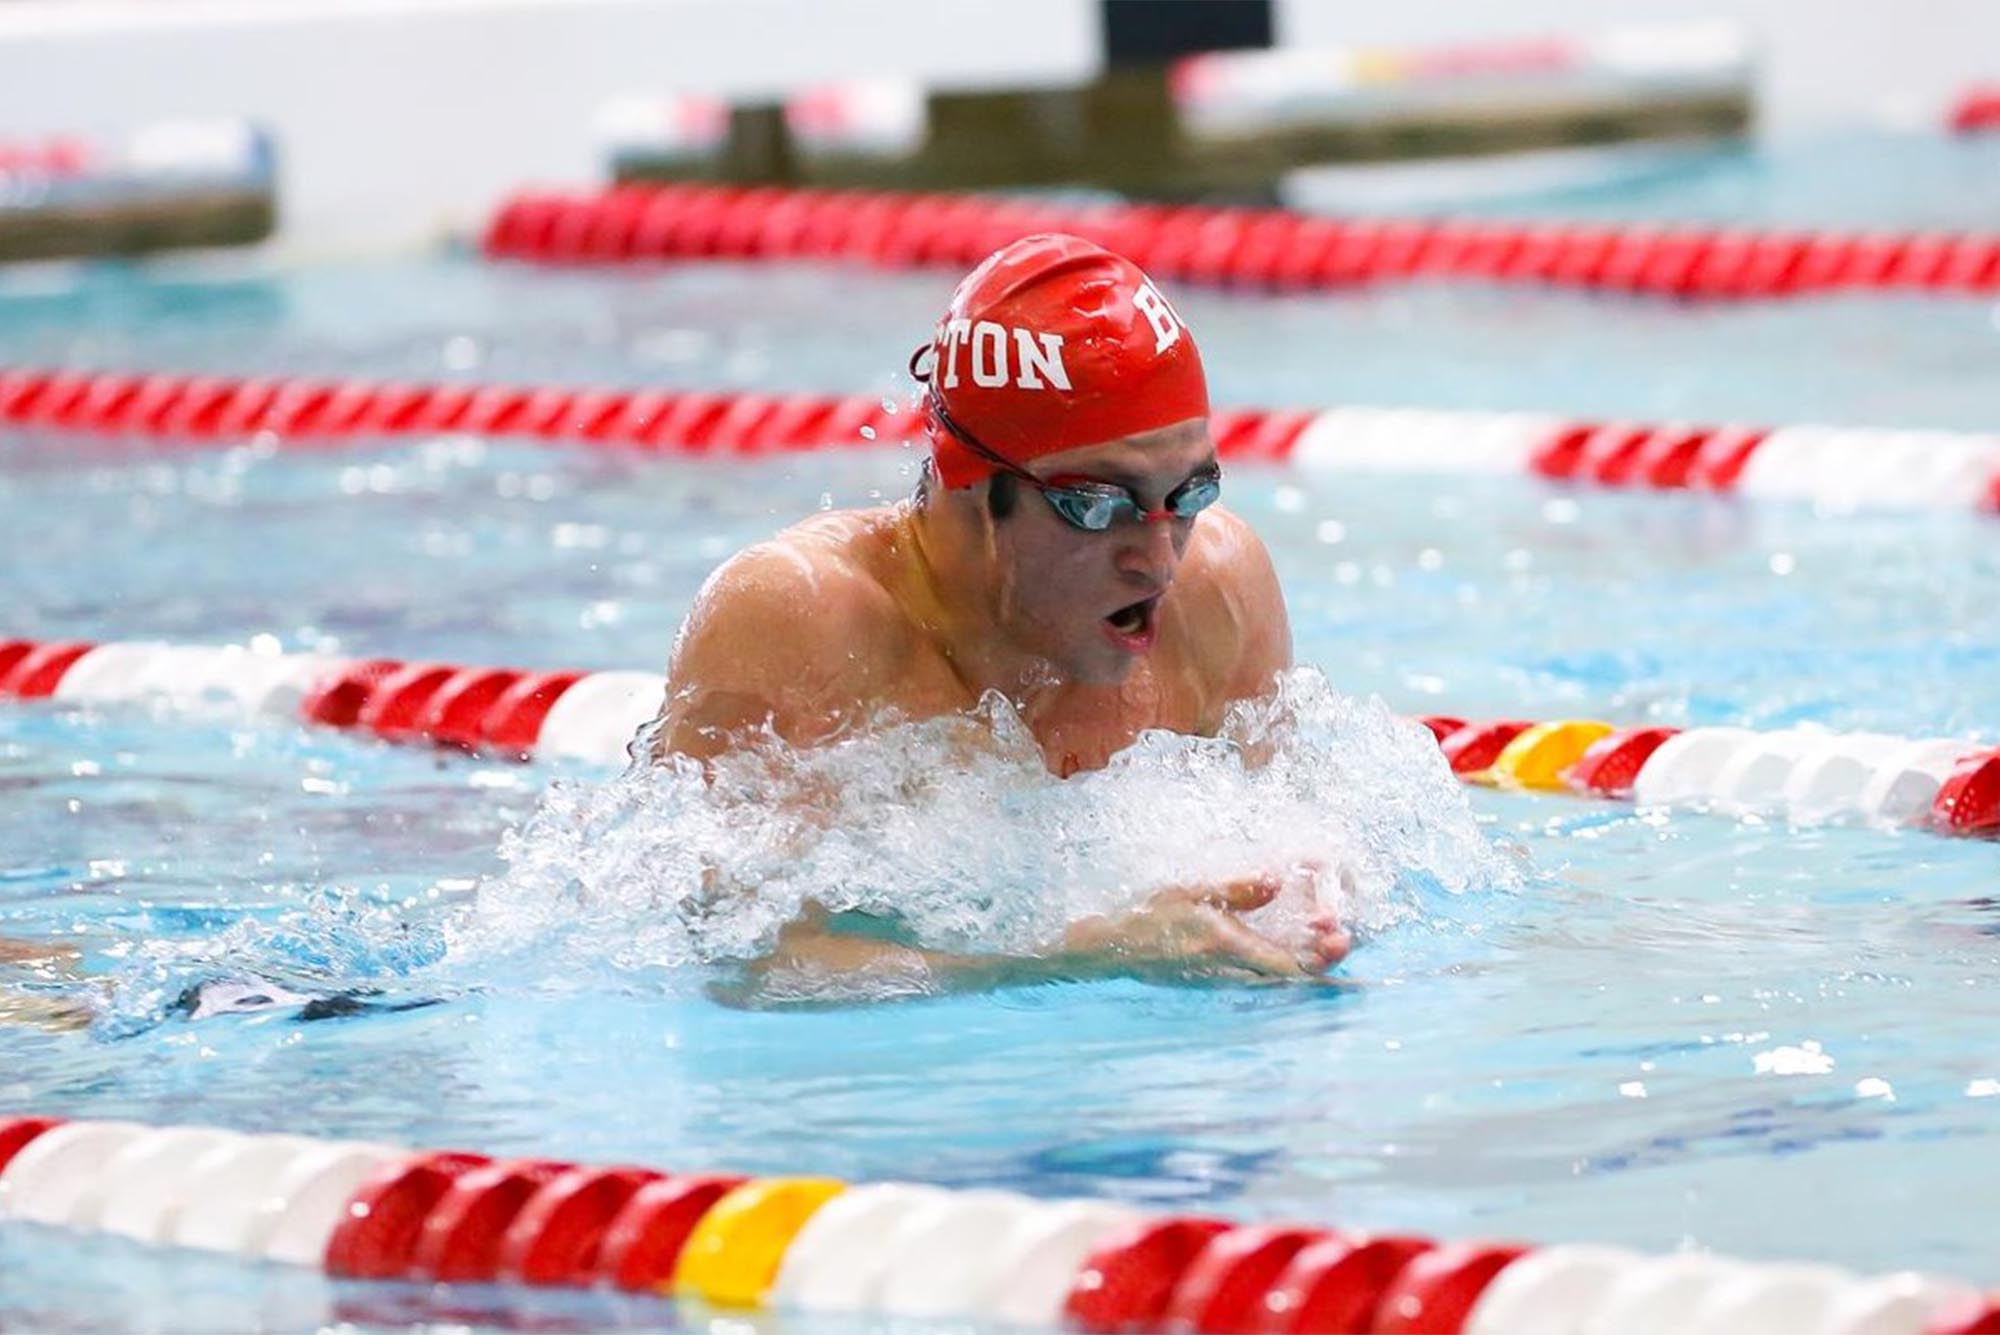 BU Men’s swimmer Jacob Lindner swims at a recent meet. He is wearing goggles and a BU swim cap.